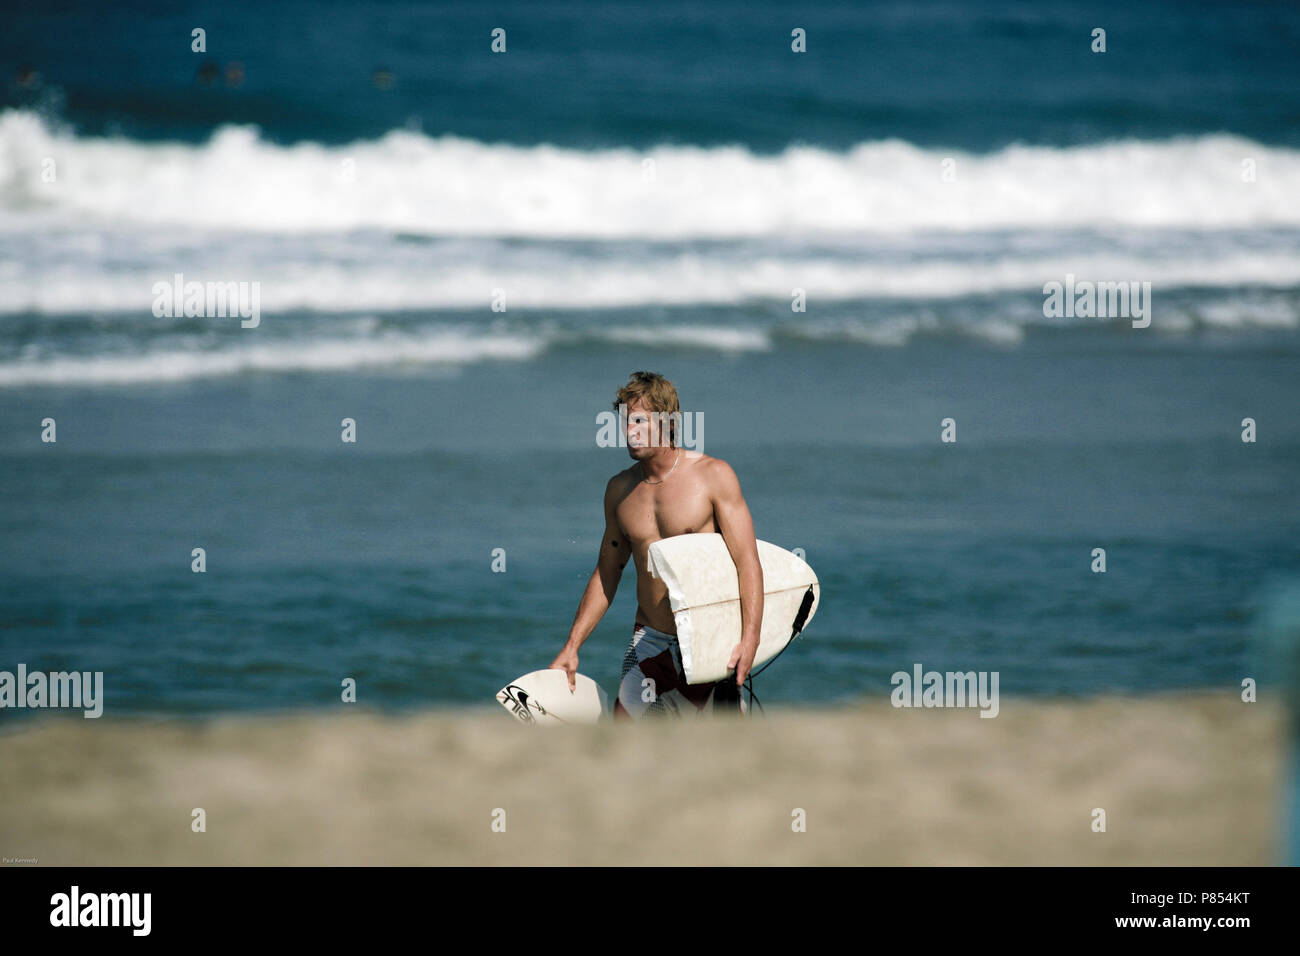 Surfer with snapped surfboard after surfing Puerto Escondido, Mexico Stock Photo